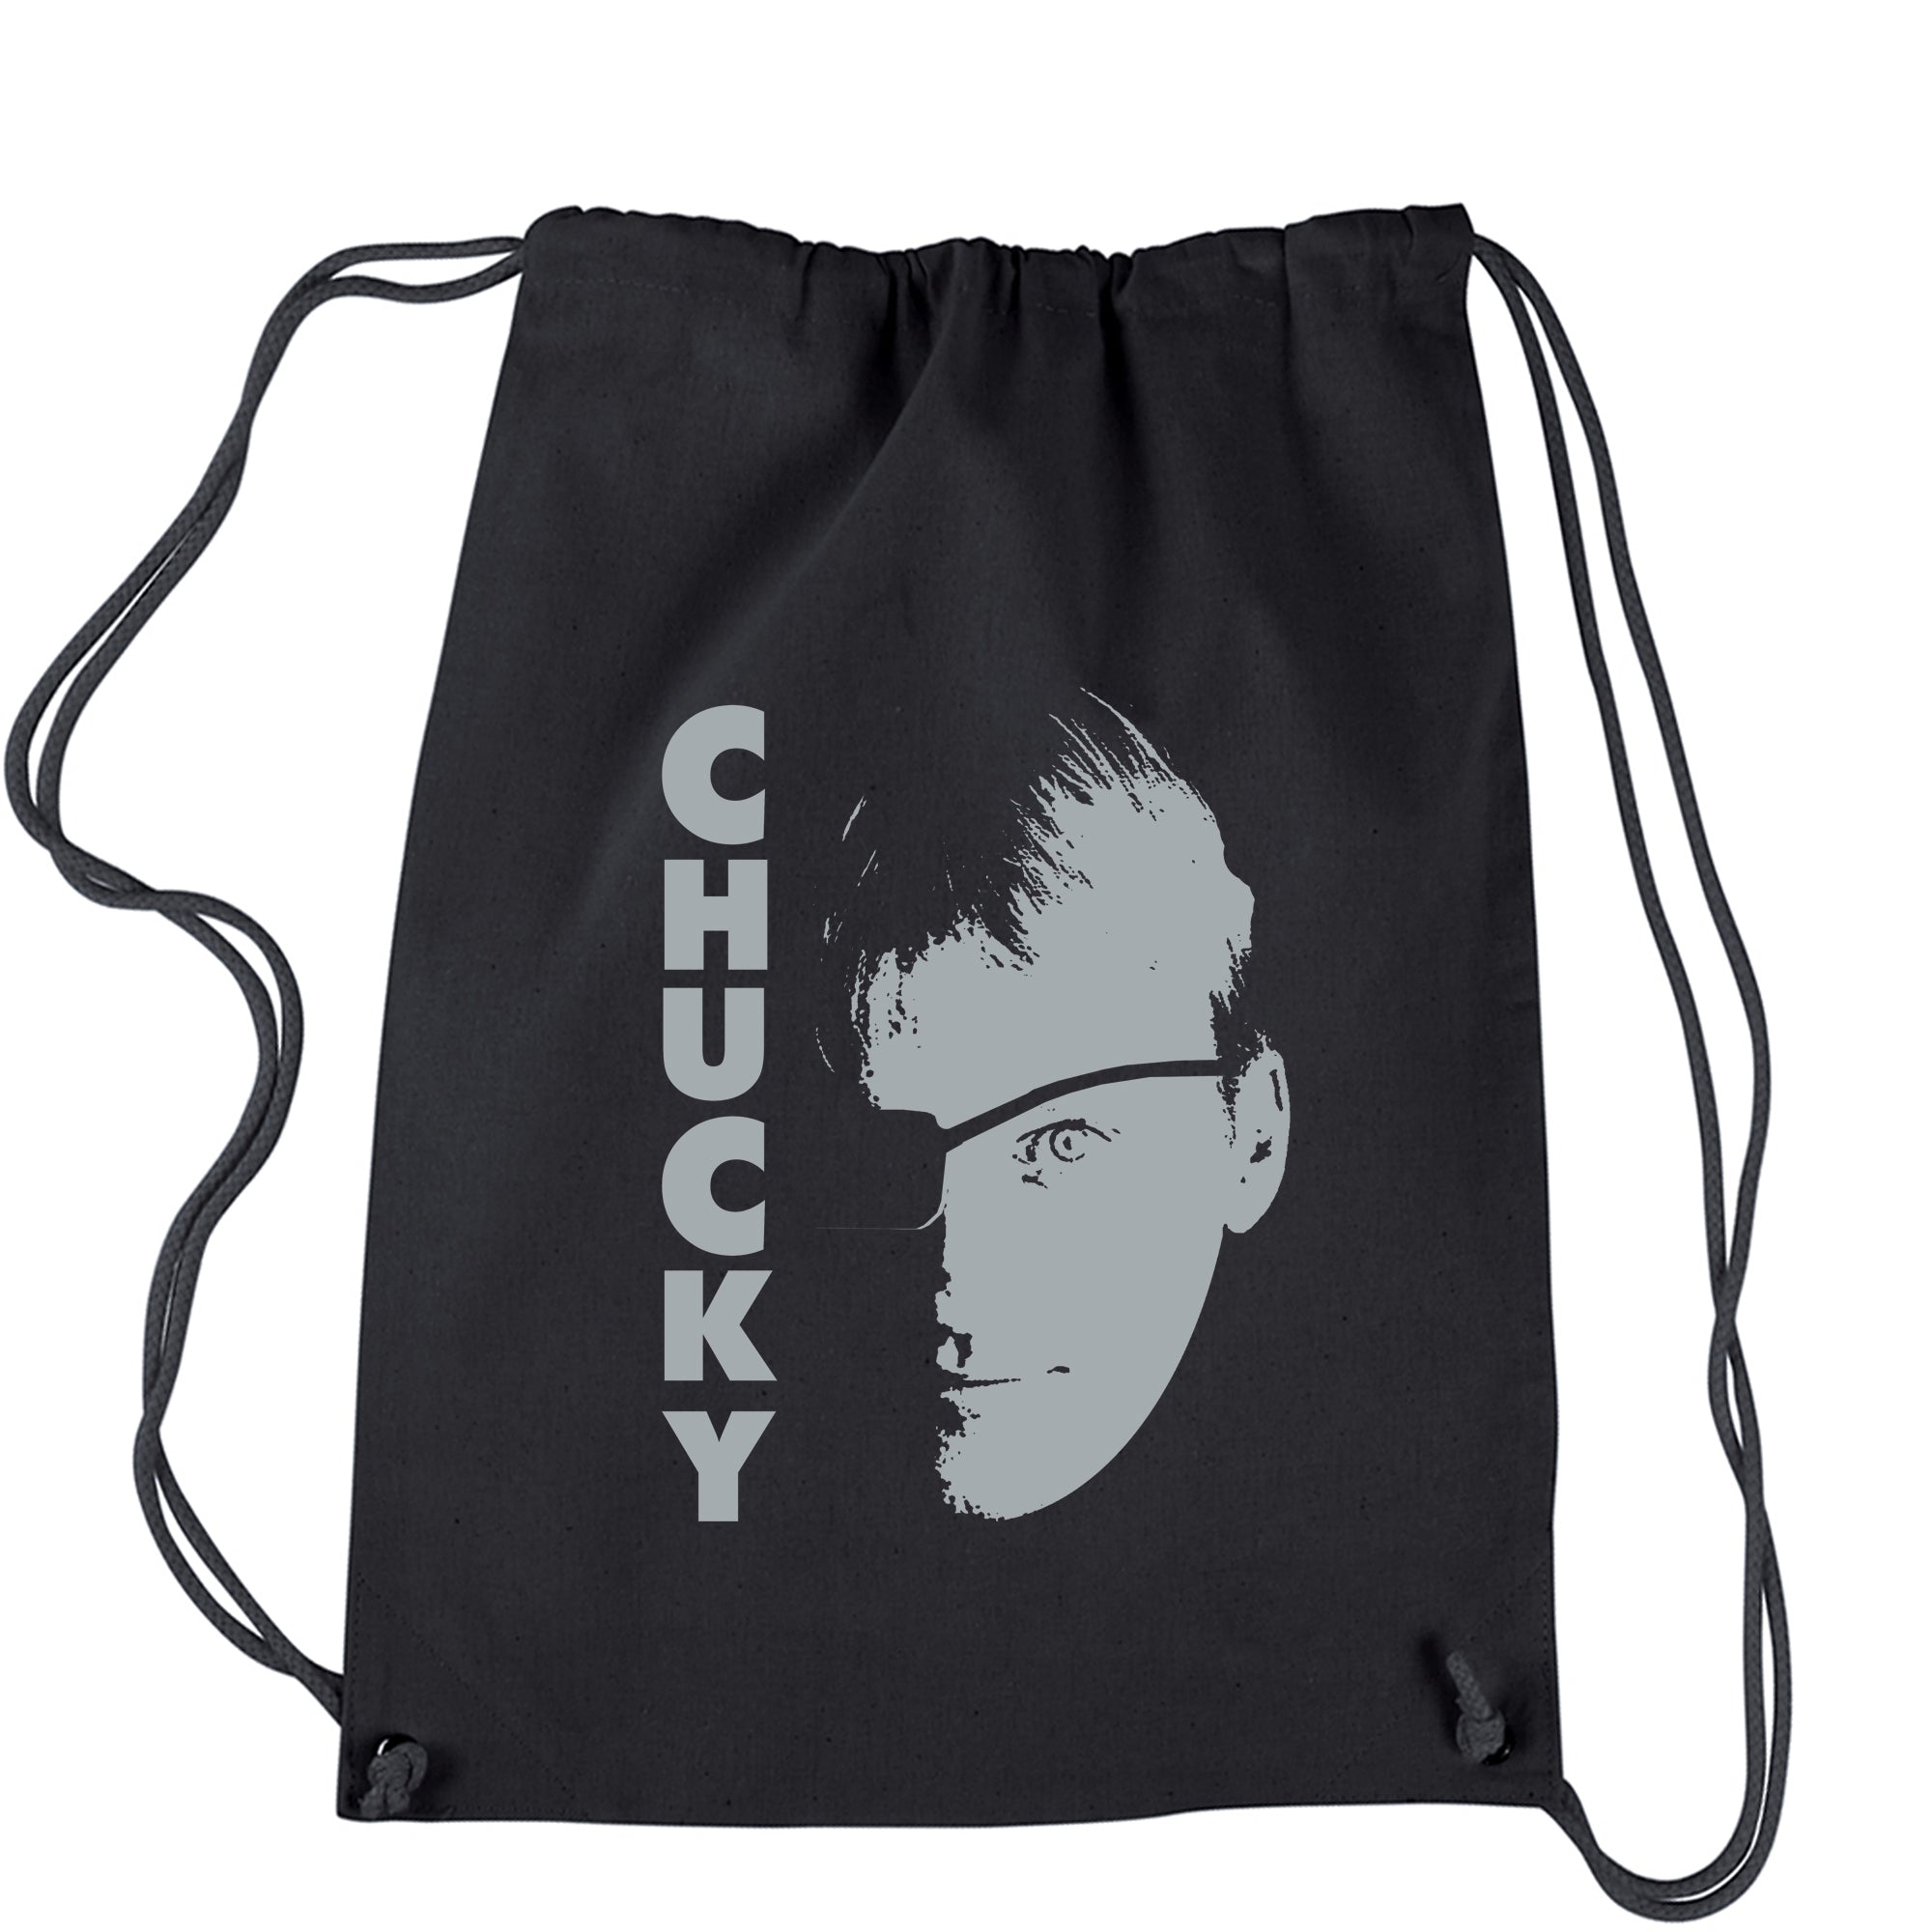 Chucky is Back in Oakland Drawstring Backpack